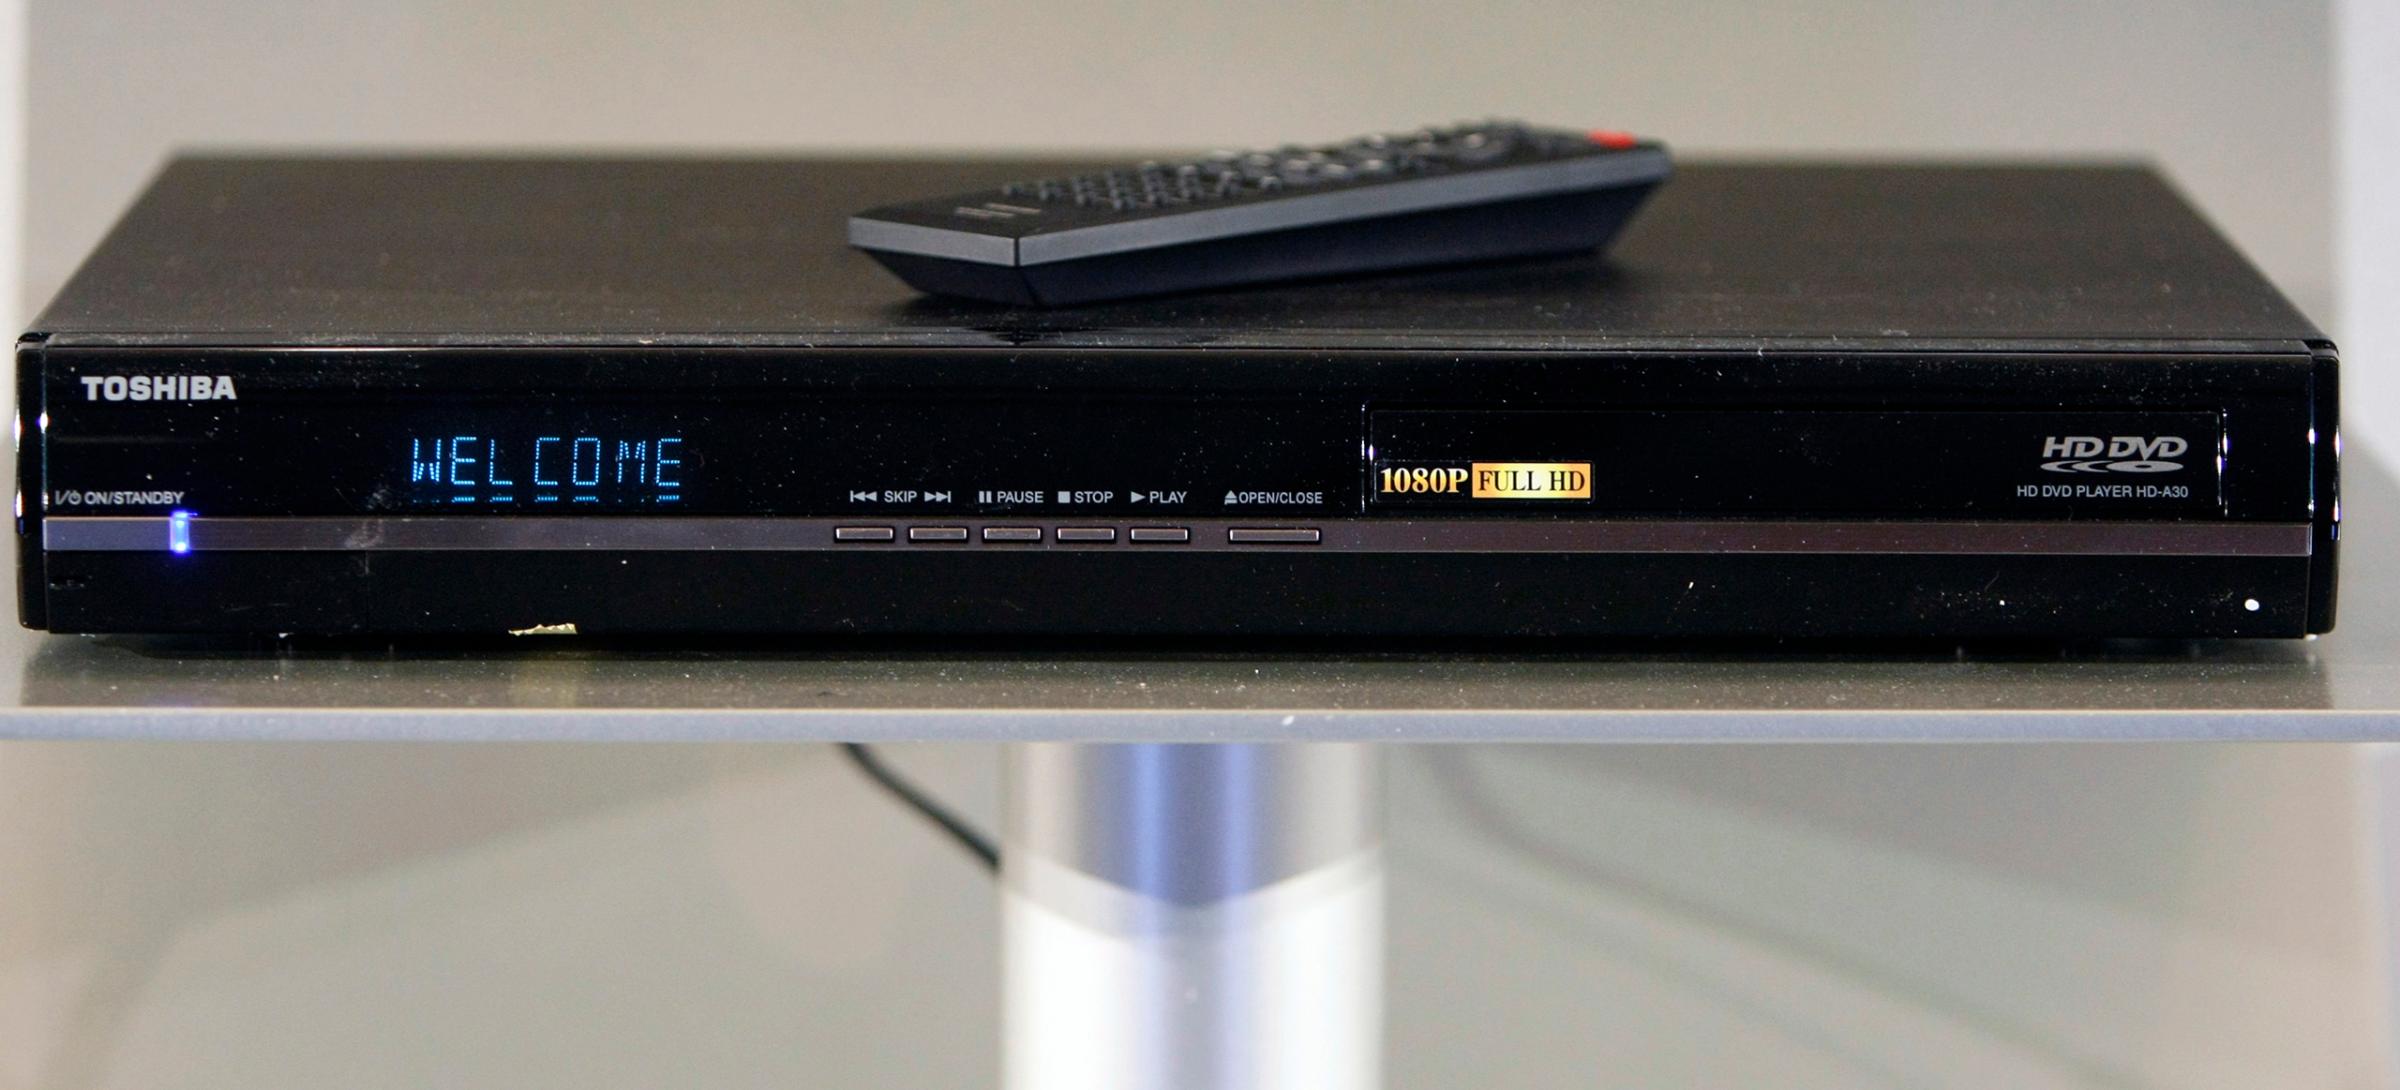 A Toshiba HD-A30 HD DVD player with 1080p resolution is shown at a news conference at the CES in Las Vegas